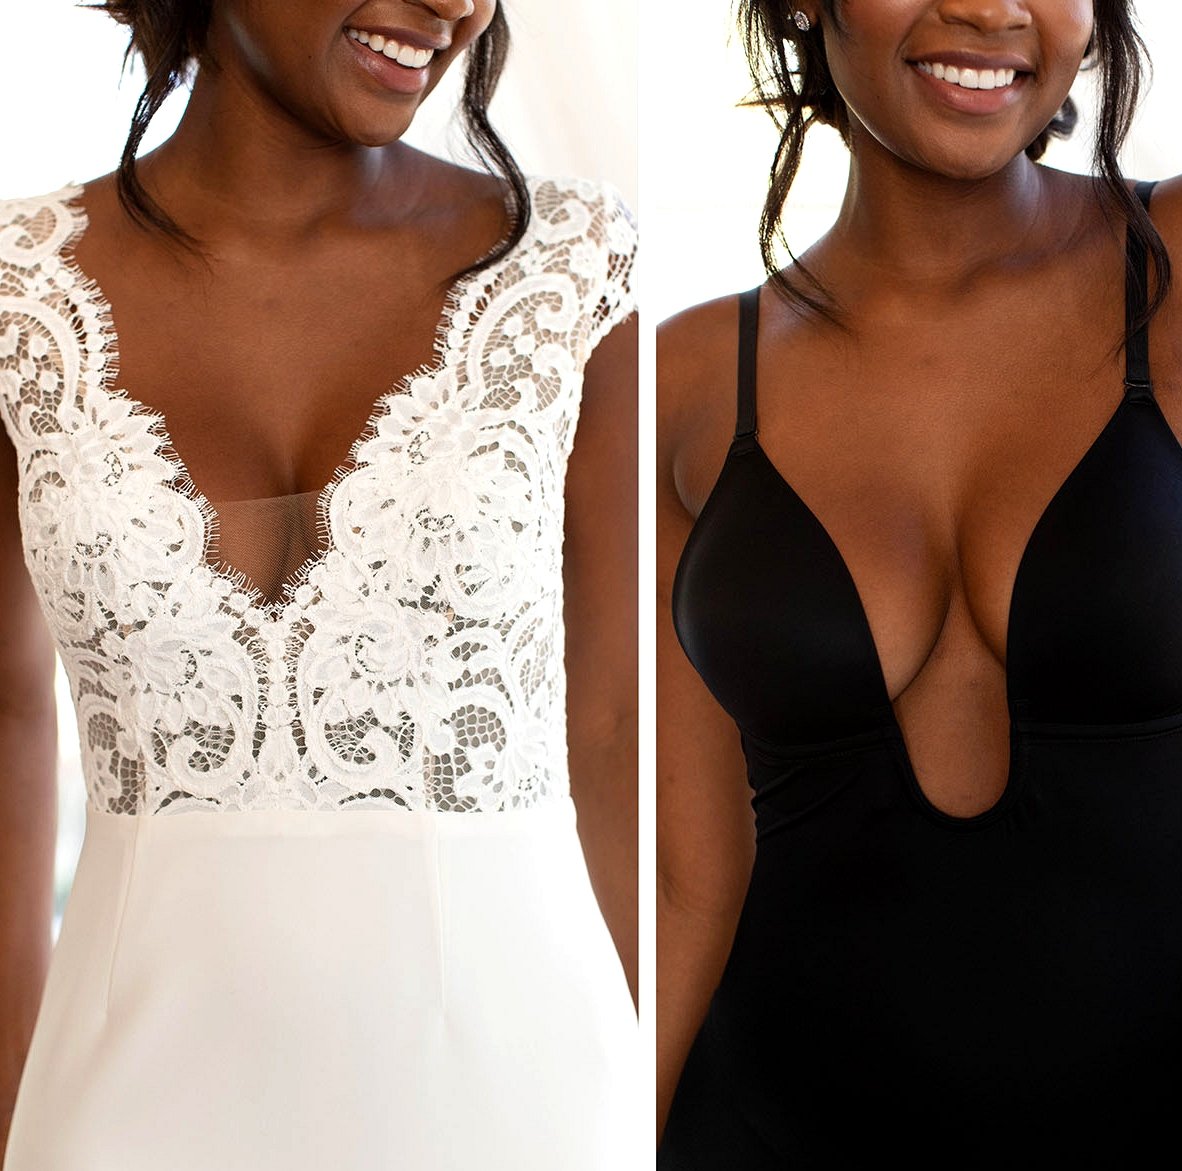 What Do You Wear Under Your Wedding Dress? Spanx Has ...